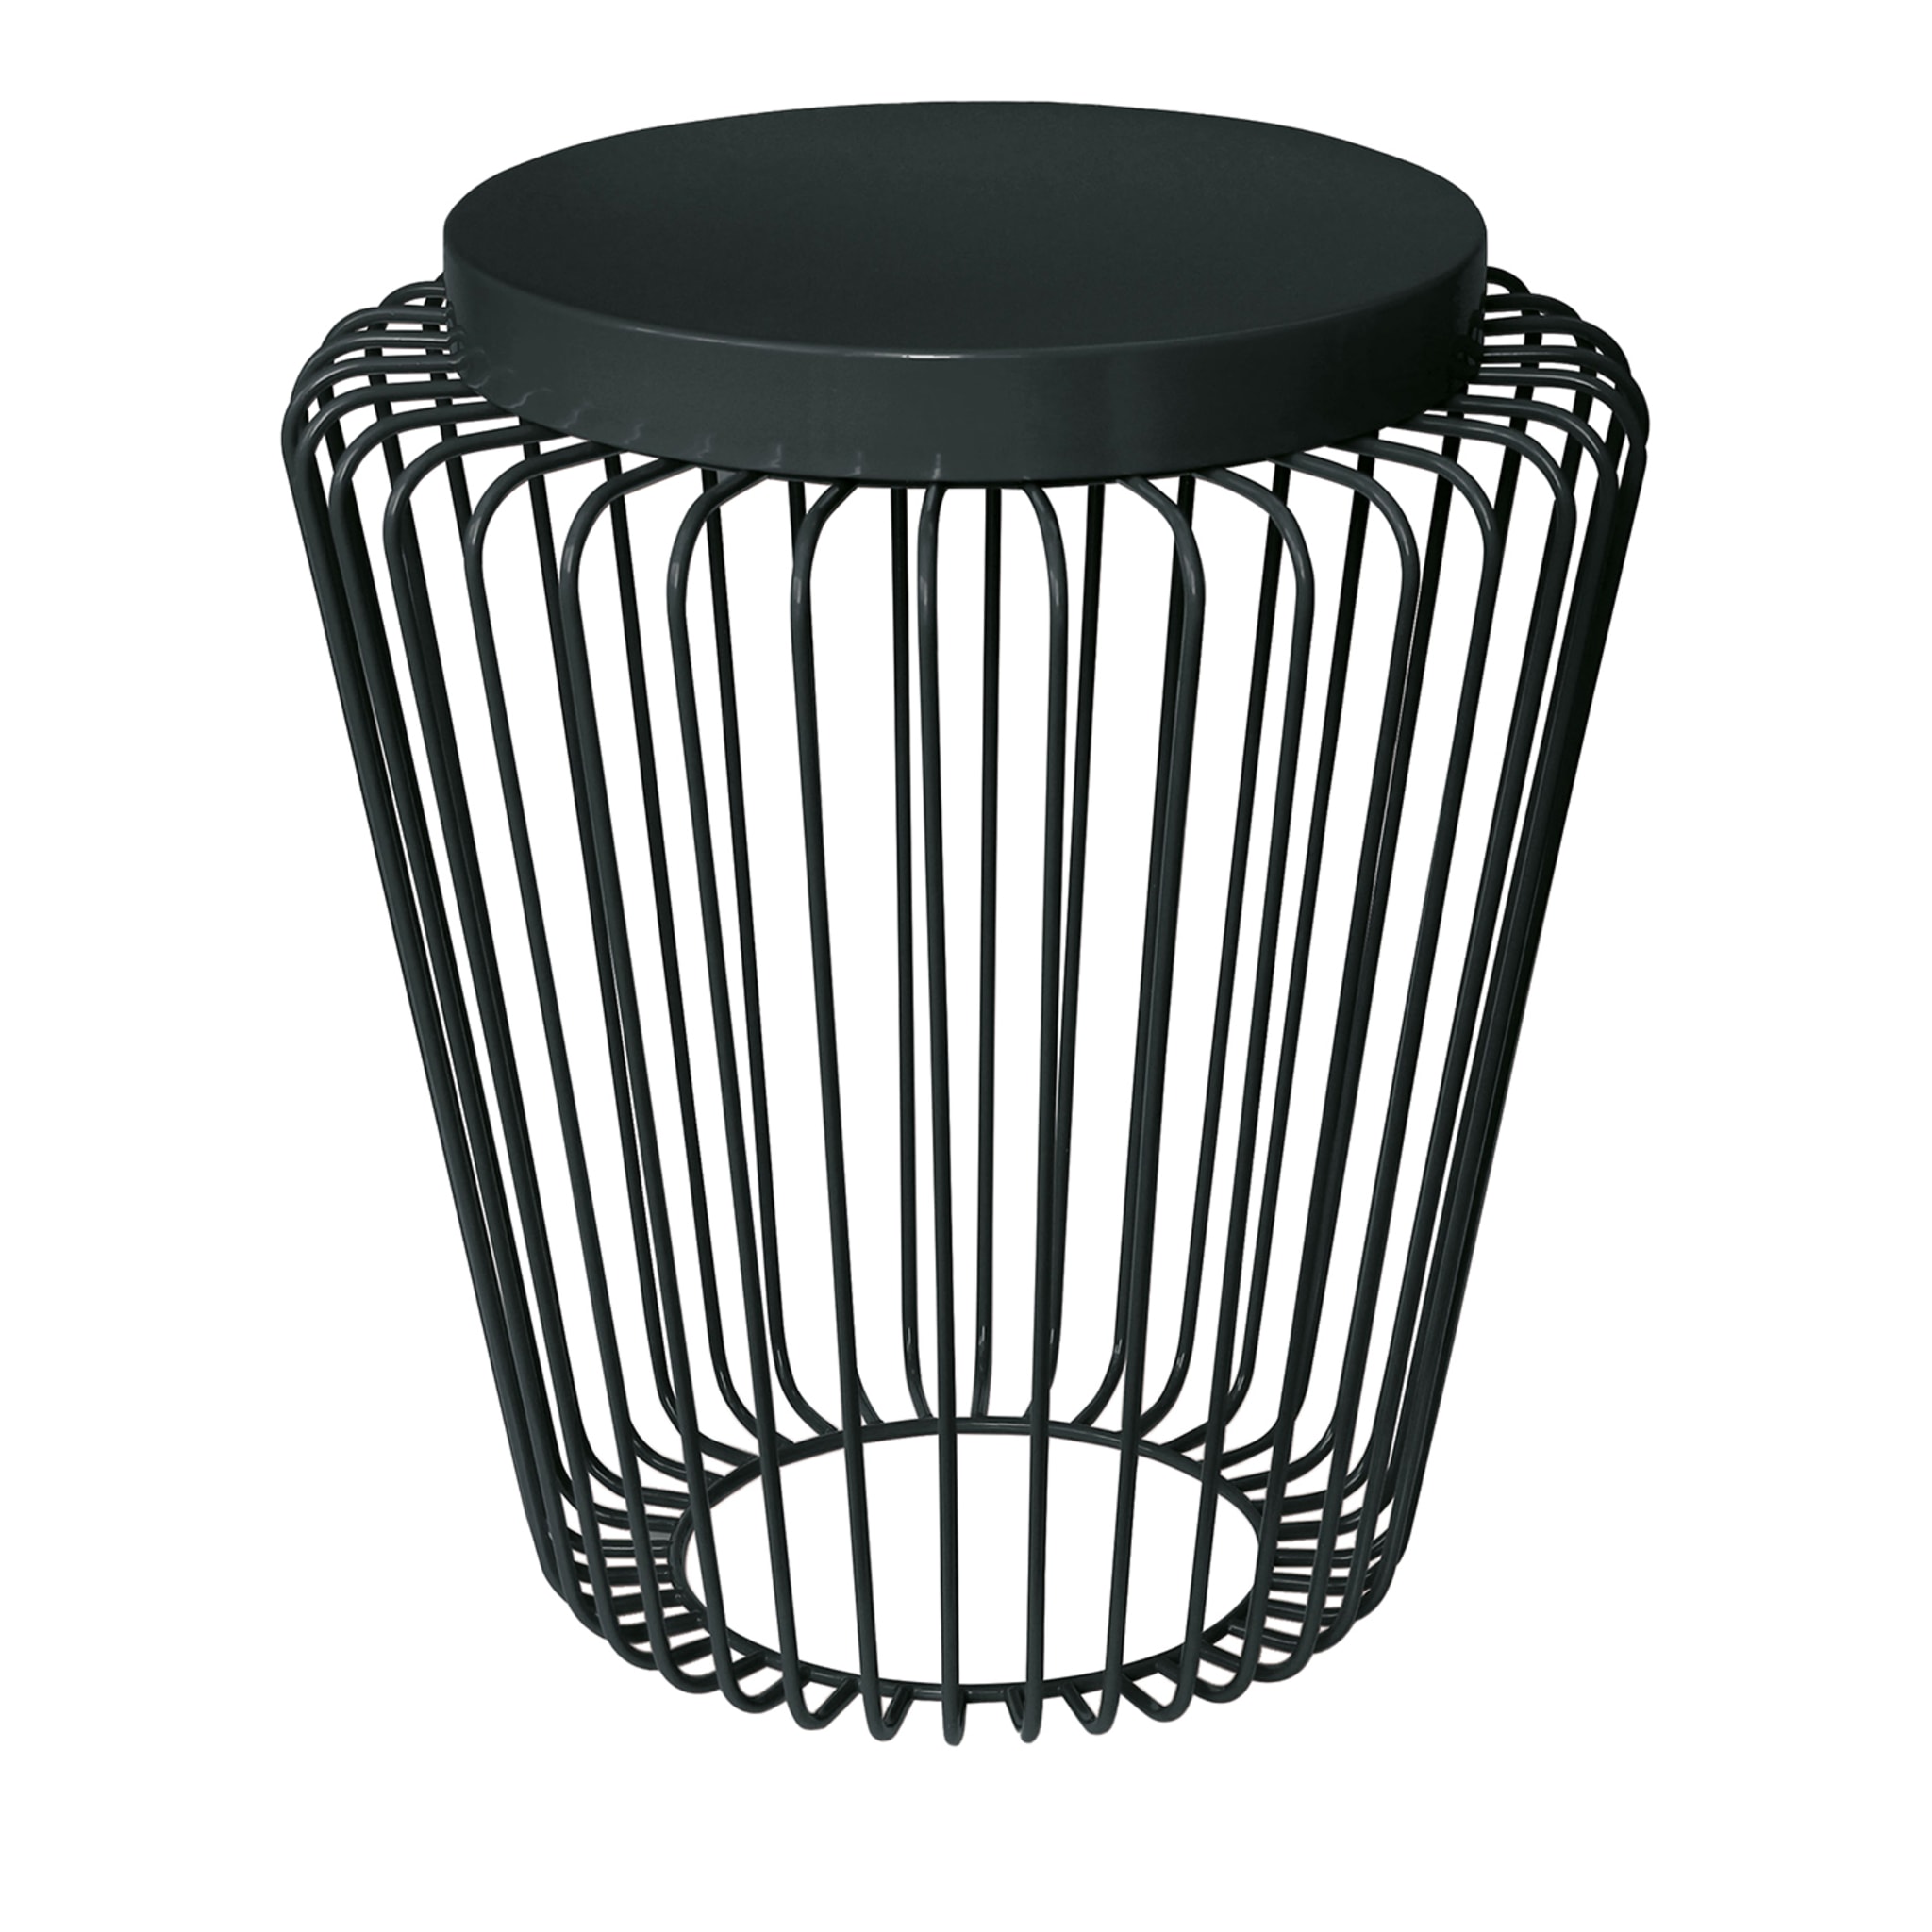 Cage Black Lantern by Stefano Tabarin - Main view